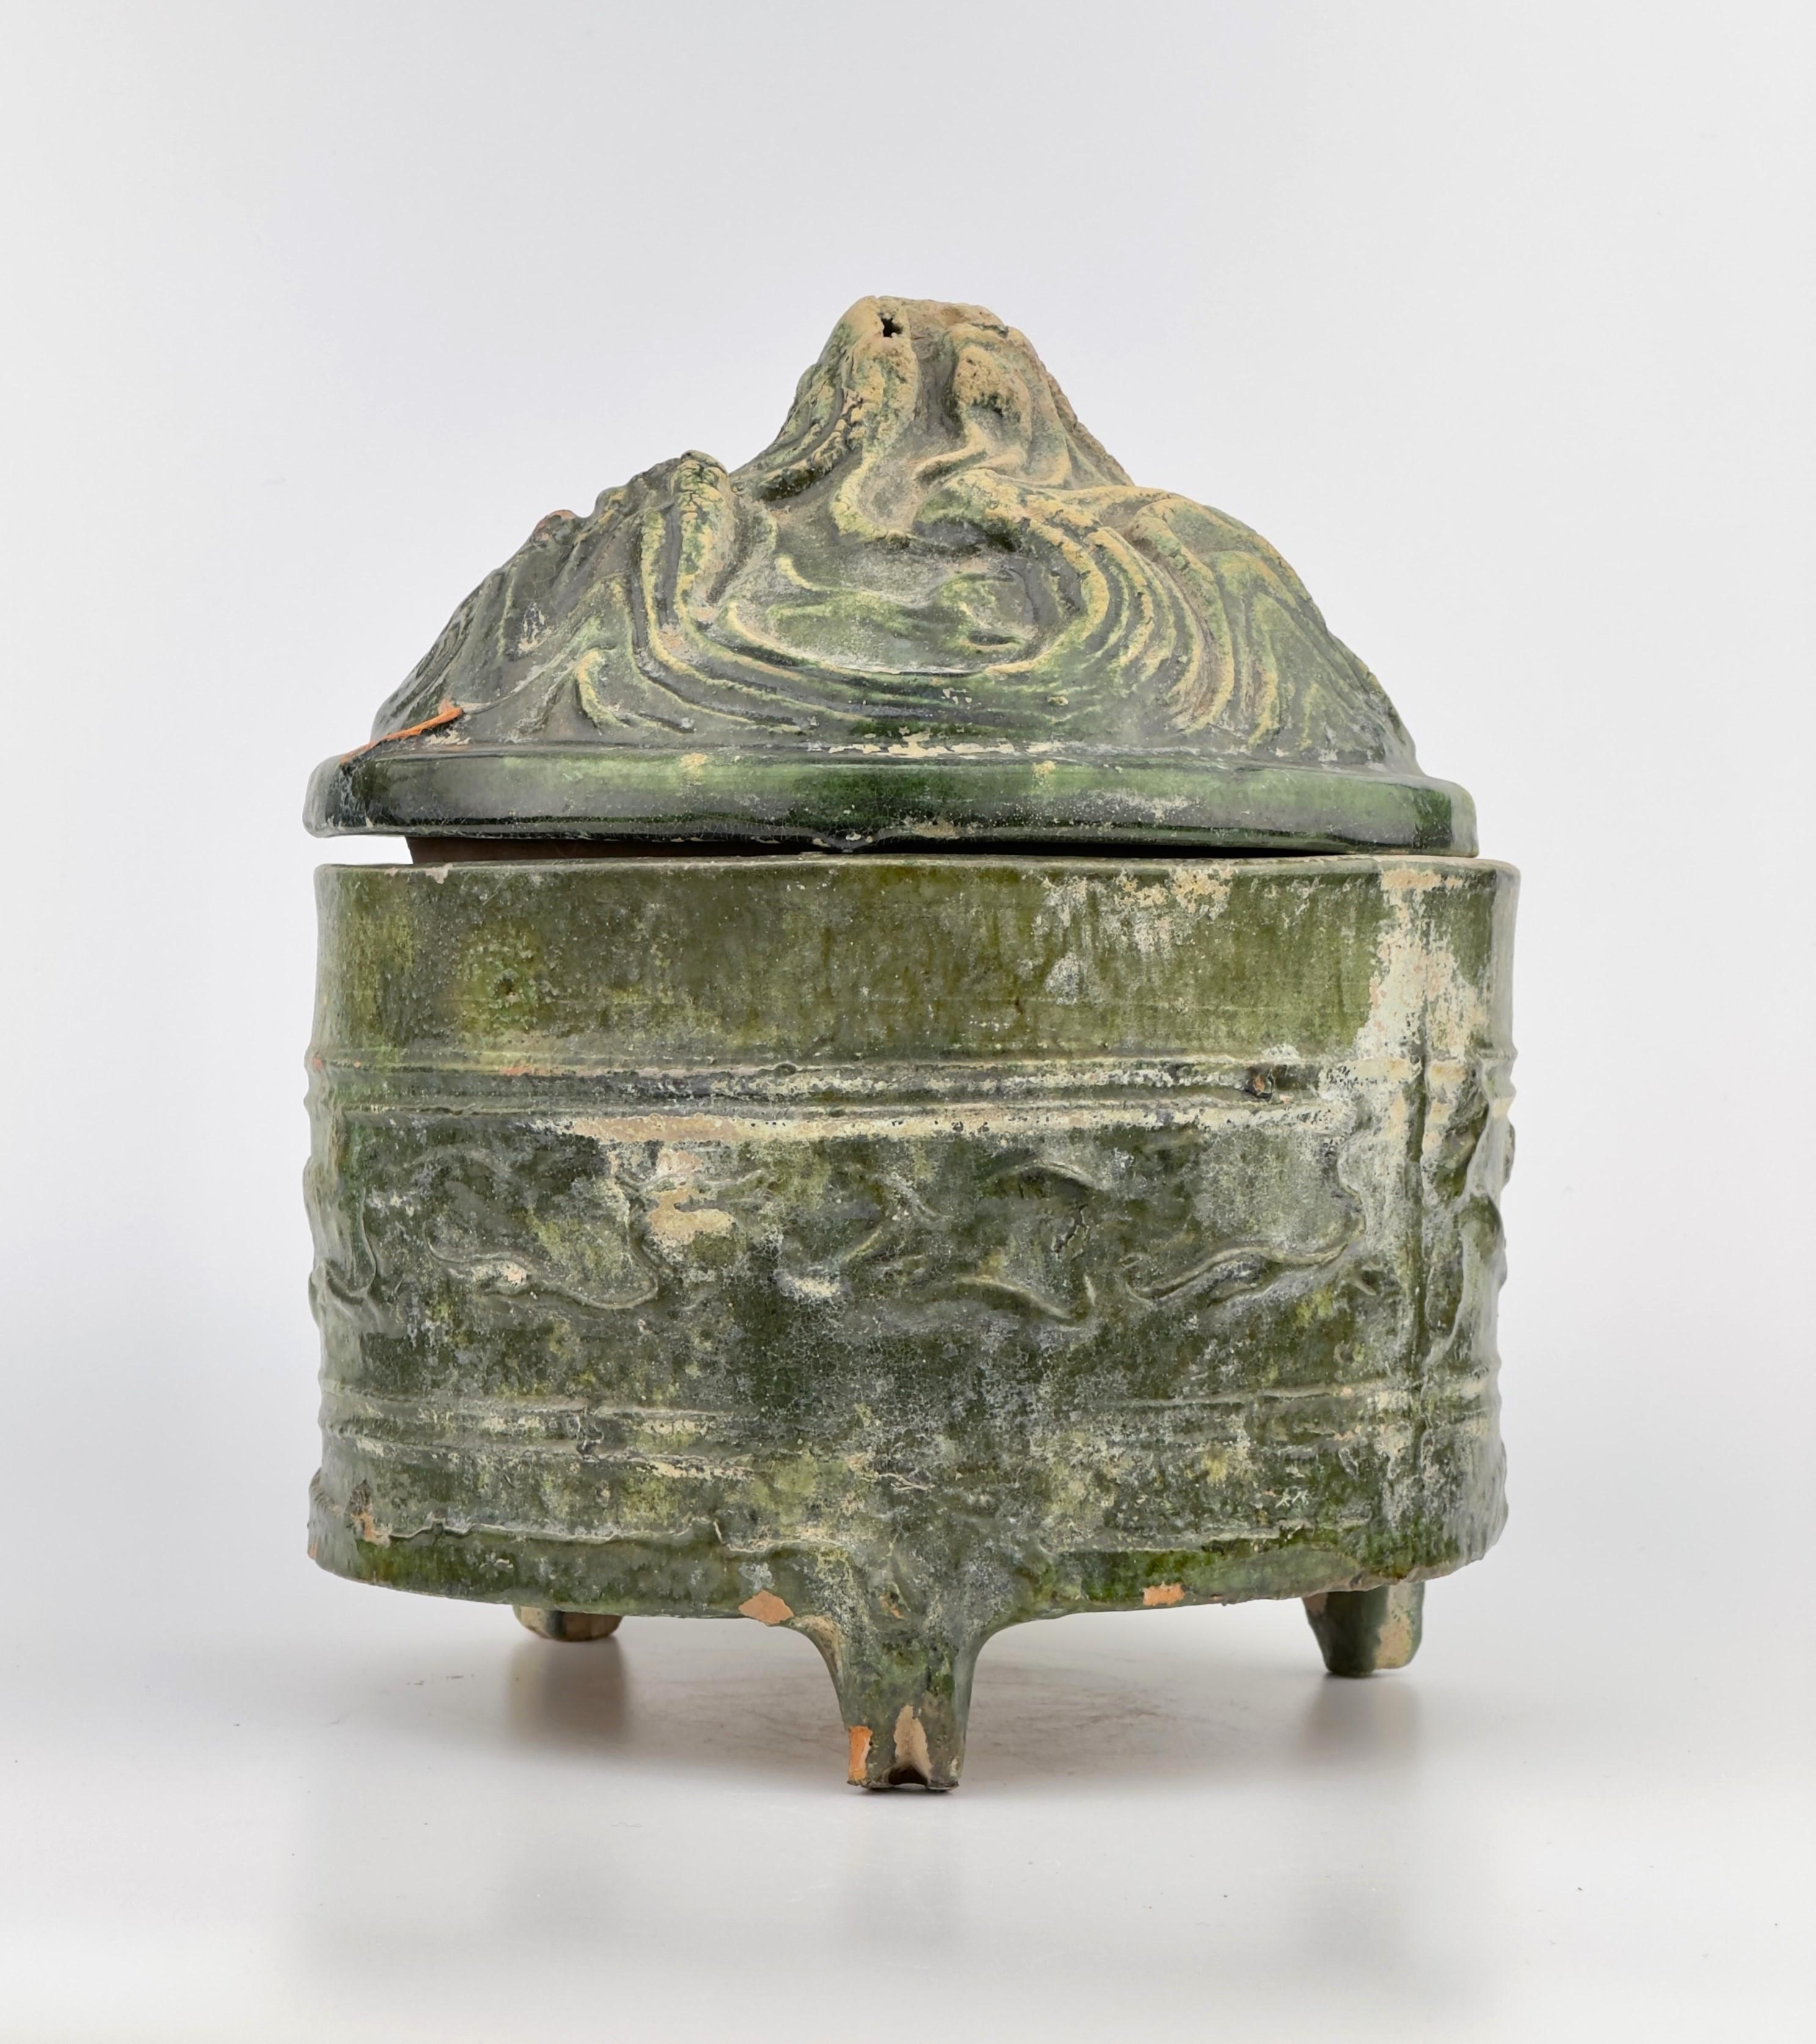 The modelled animal figures and landscapes of this piece represent the Daoist ideology of the Han dynasty. The mountain-shaped lid refers to the sacred dwellings of the immortals, the Kunlun mountains, which was ruled by the Queen Mother of the